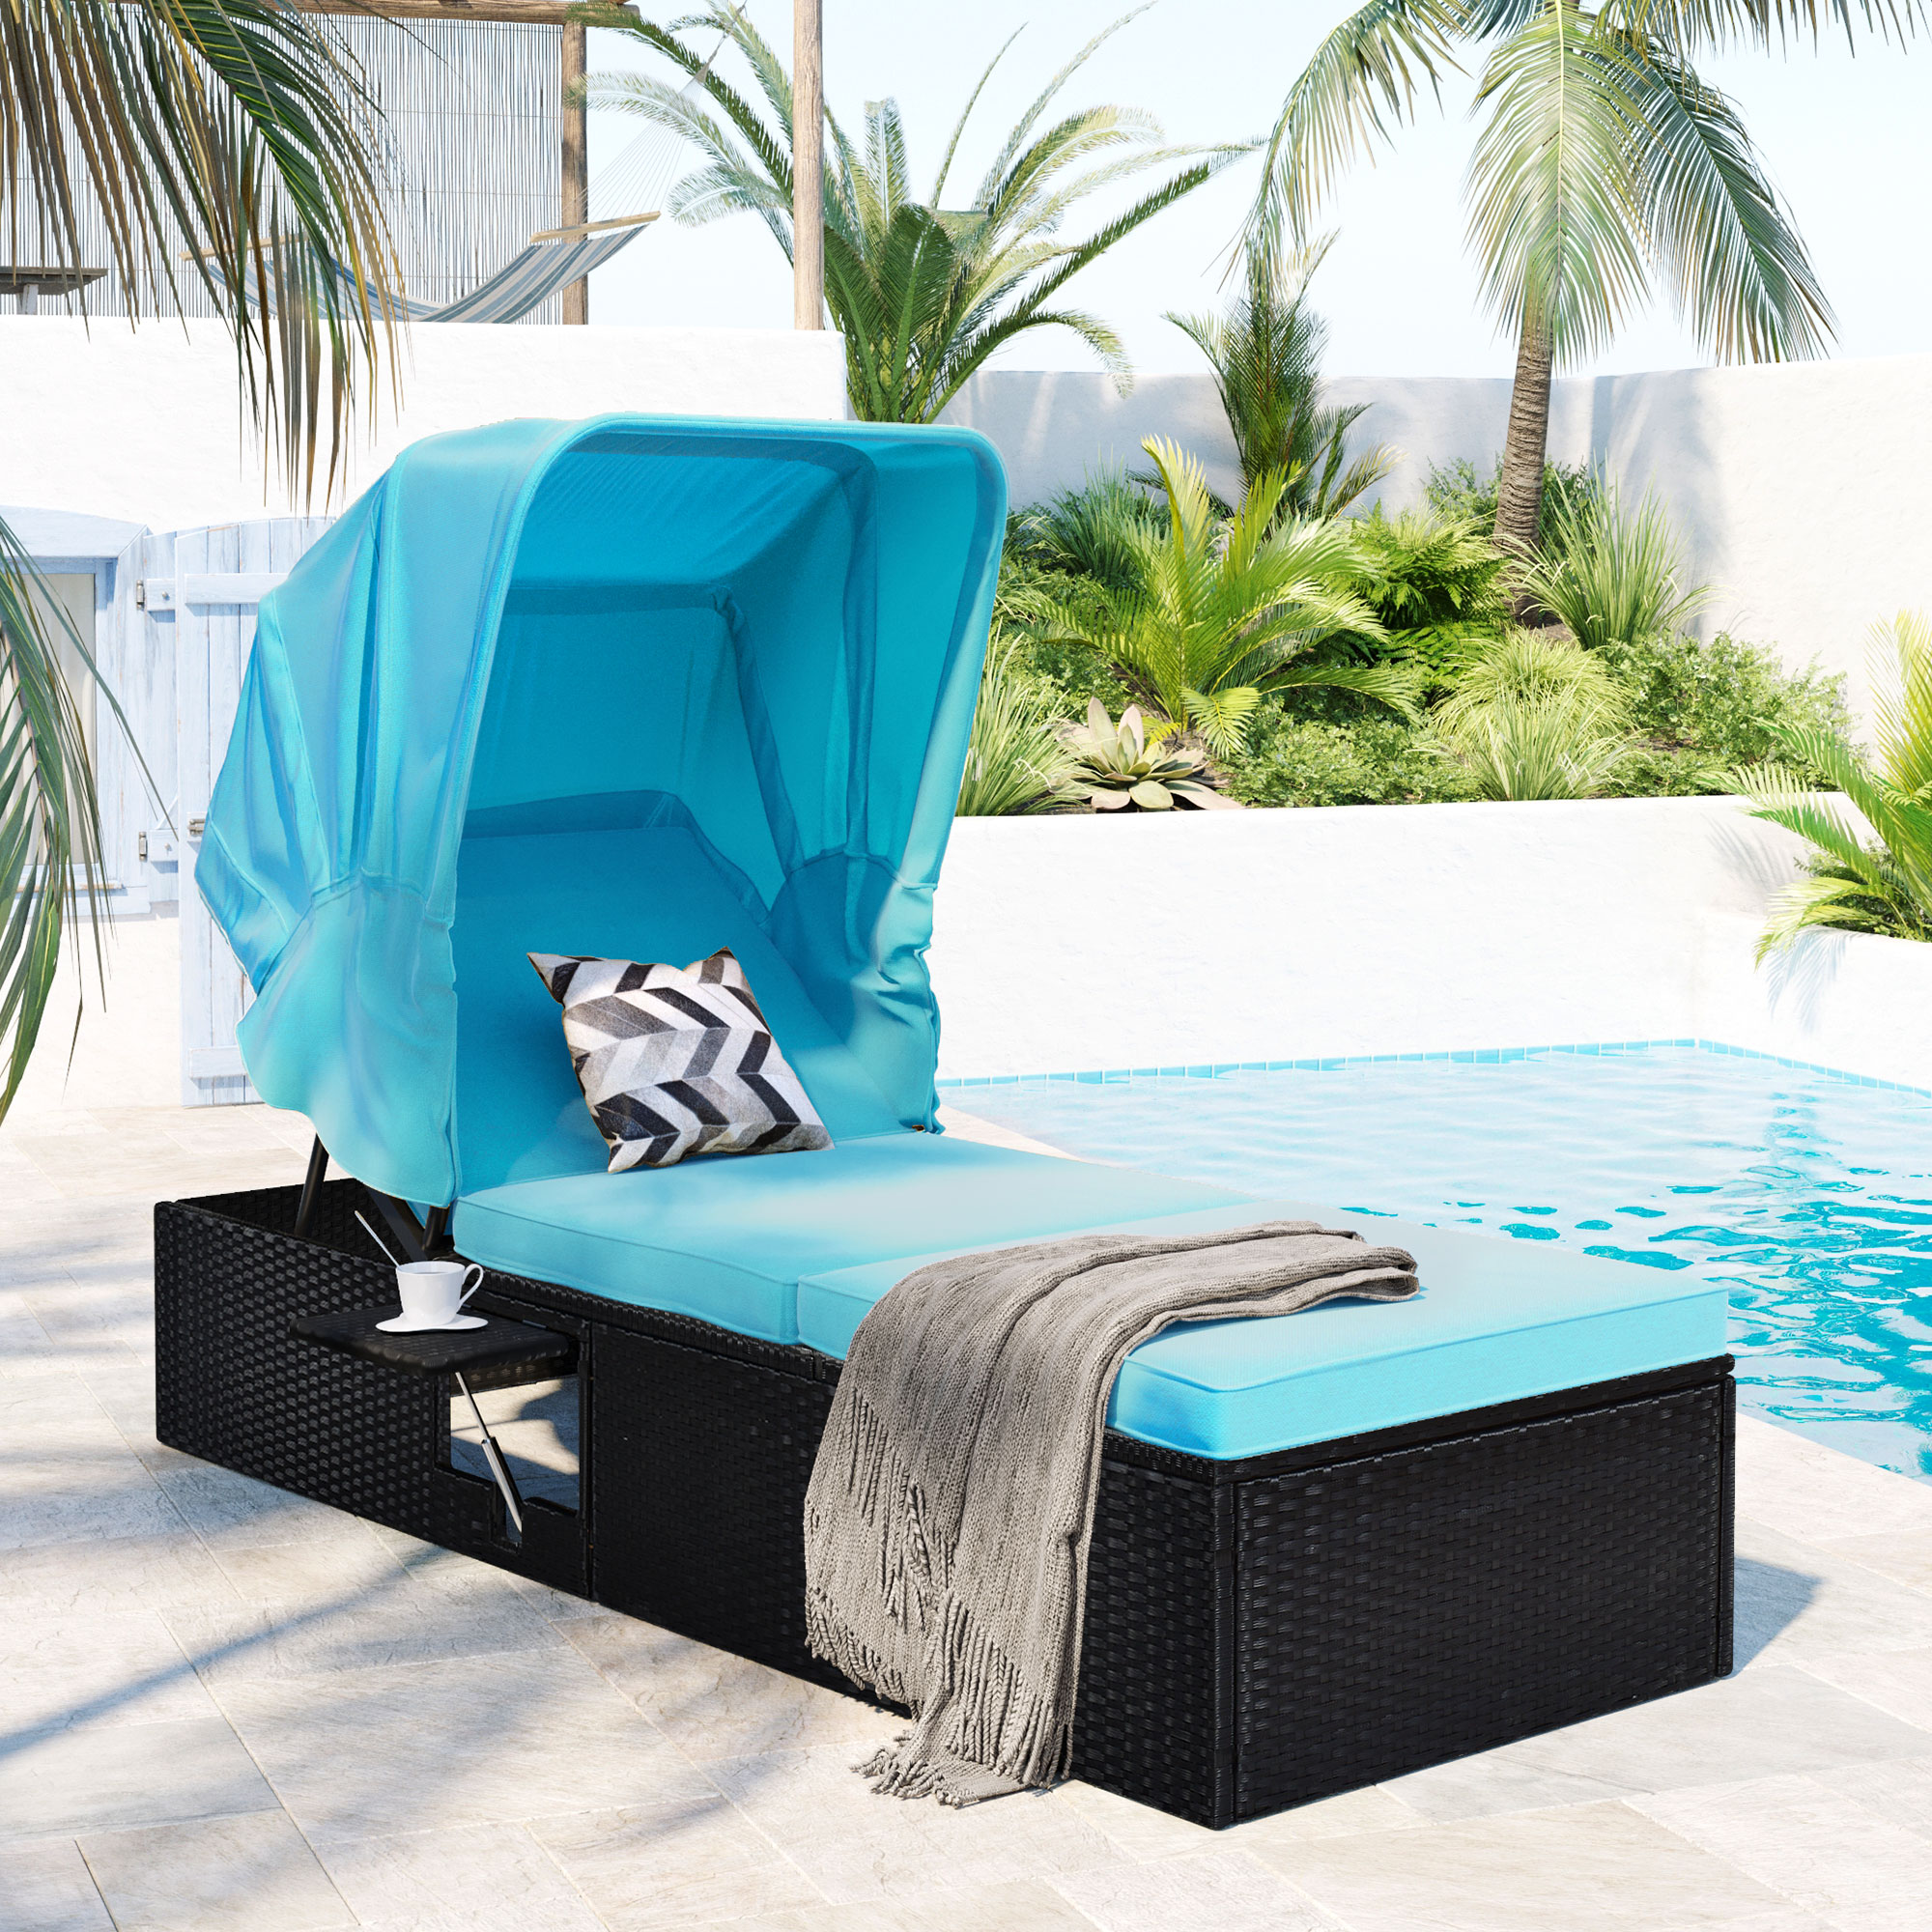 Chaise Lounge Chair for Outdoor, Patio Adjustable Sun Lounger Chair with Canopy, Cup Table and Removable Cushions, PE Wicker Reclining Chaise Chair for Backyard, Poolside, Porch, D8271 - image 1 of 12